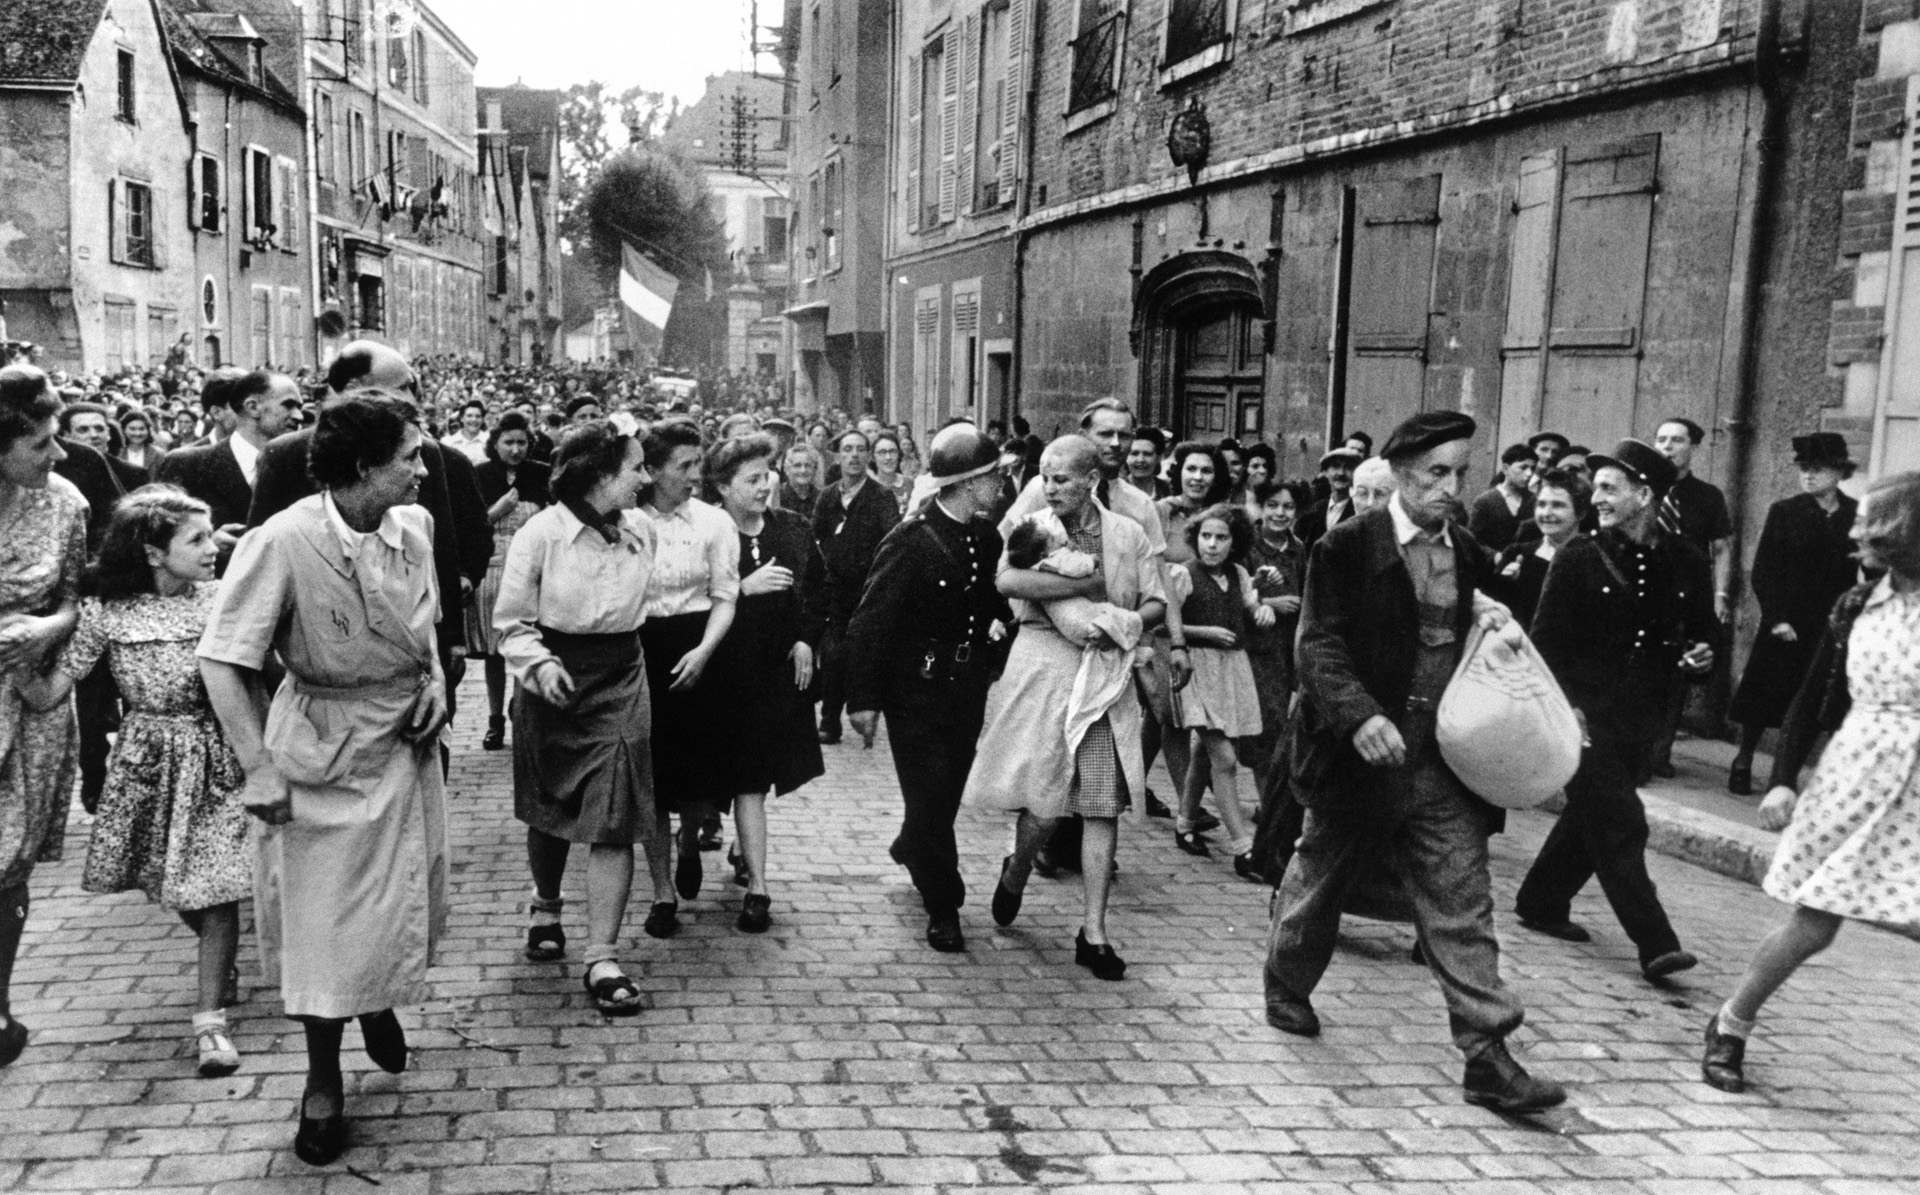 The French were brutal to their countrymen who collaborated with the Germans. Here a woman, whose head has been shaved, carries her baby by a German soldier through a crowd of angry civilians in Chartres.